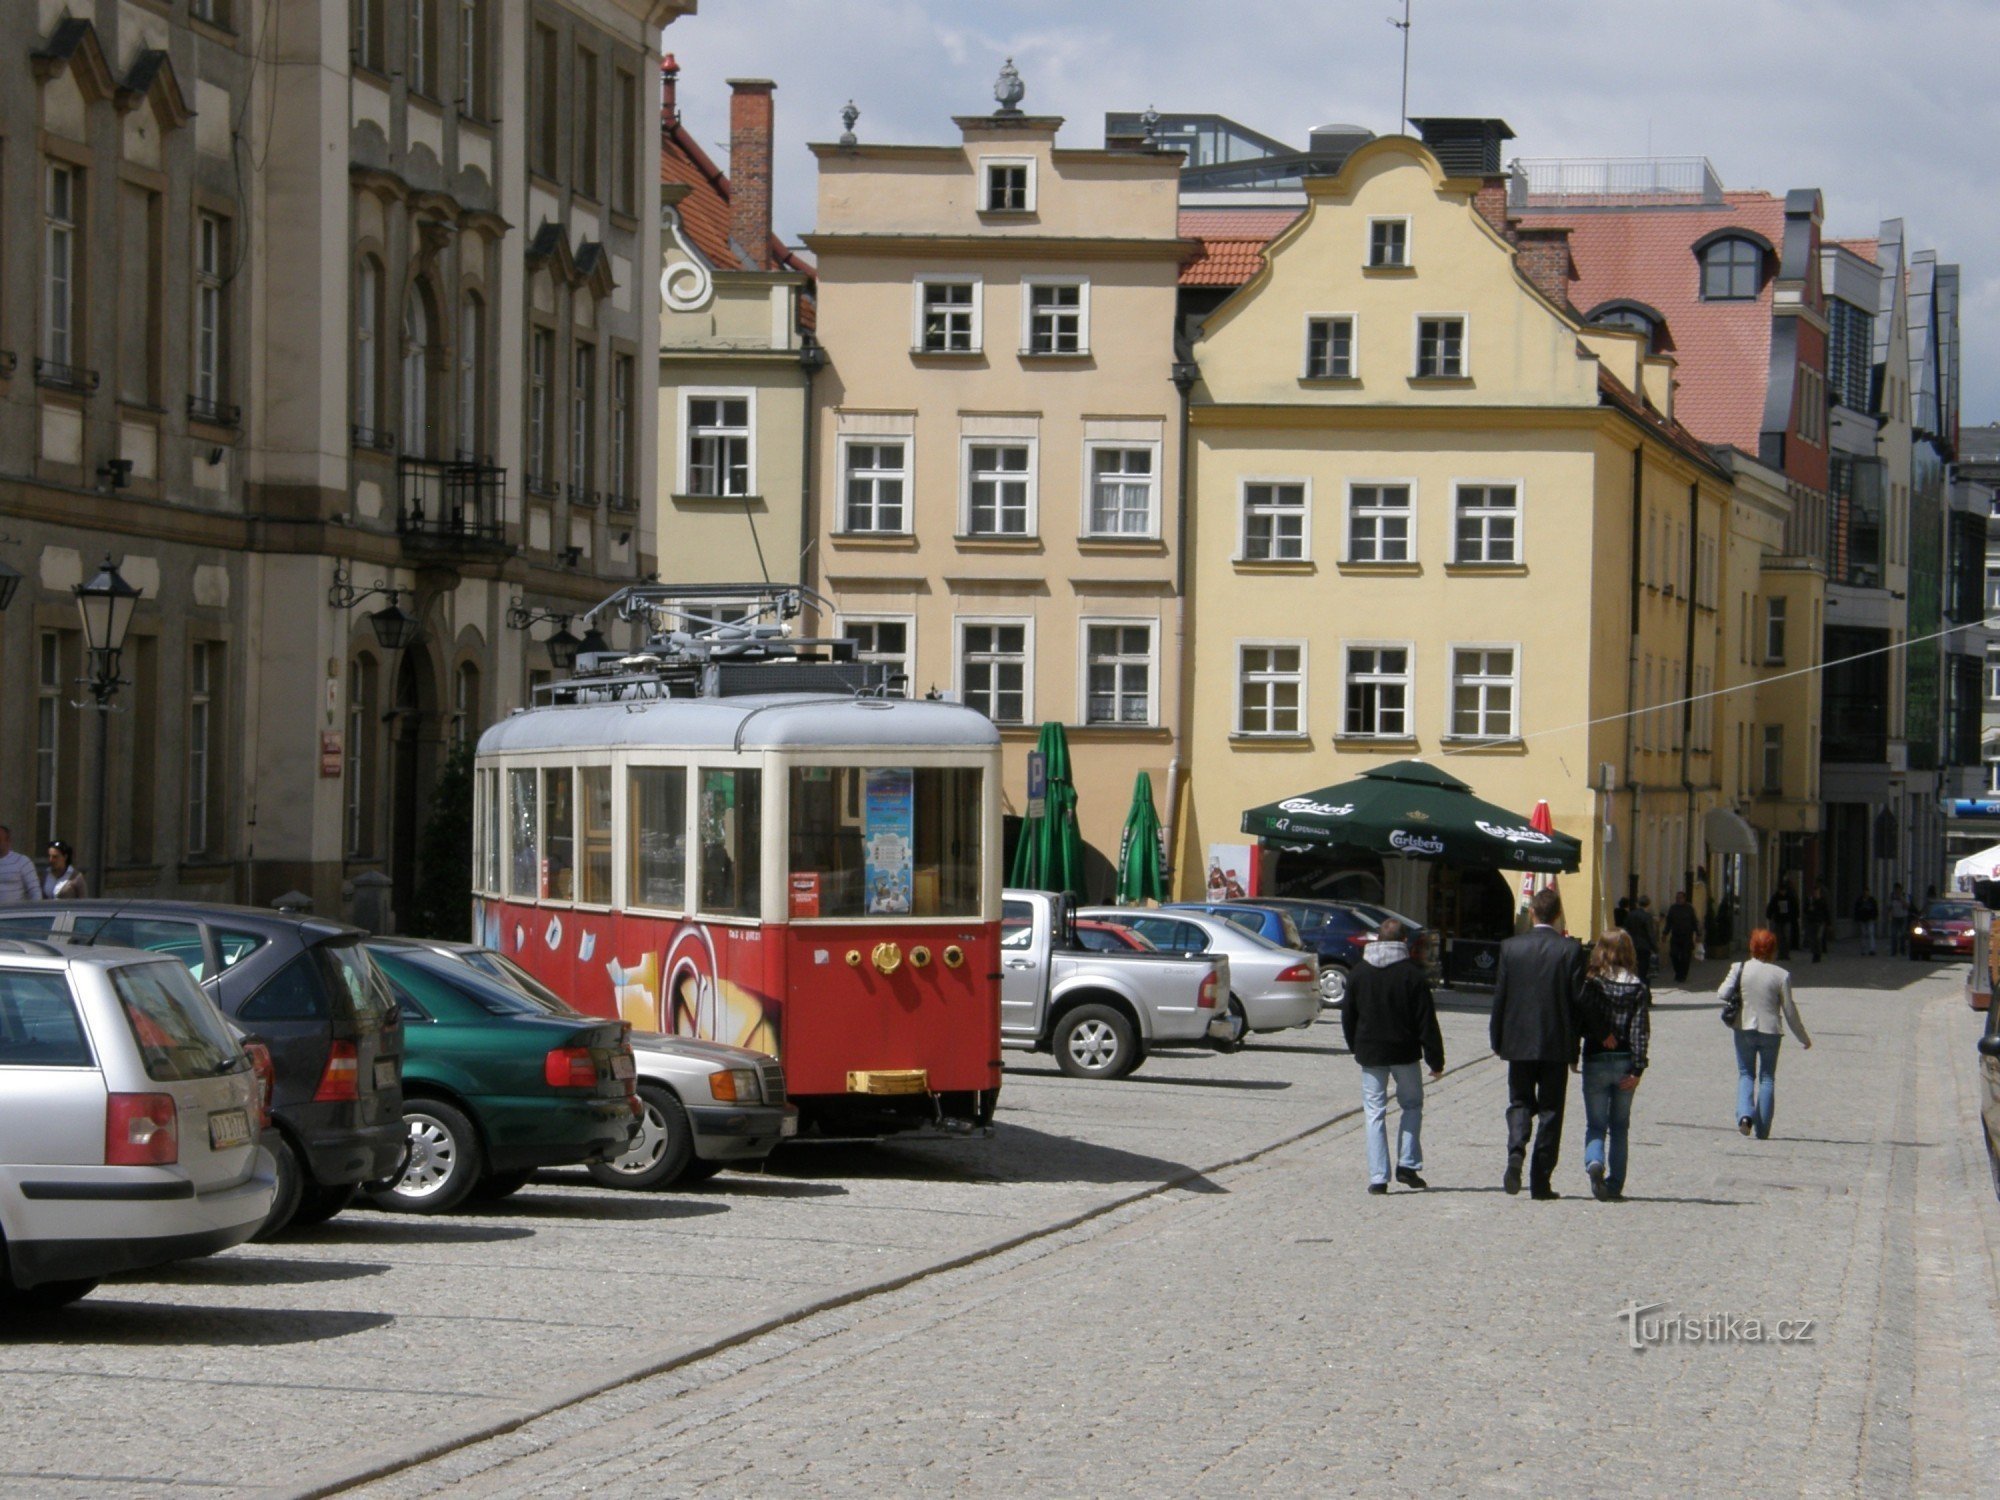 The trams in J.Góra ended at 8O. years of the last century